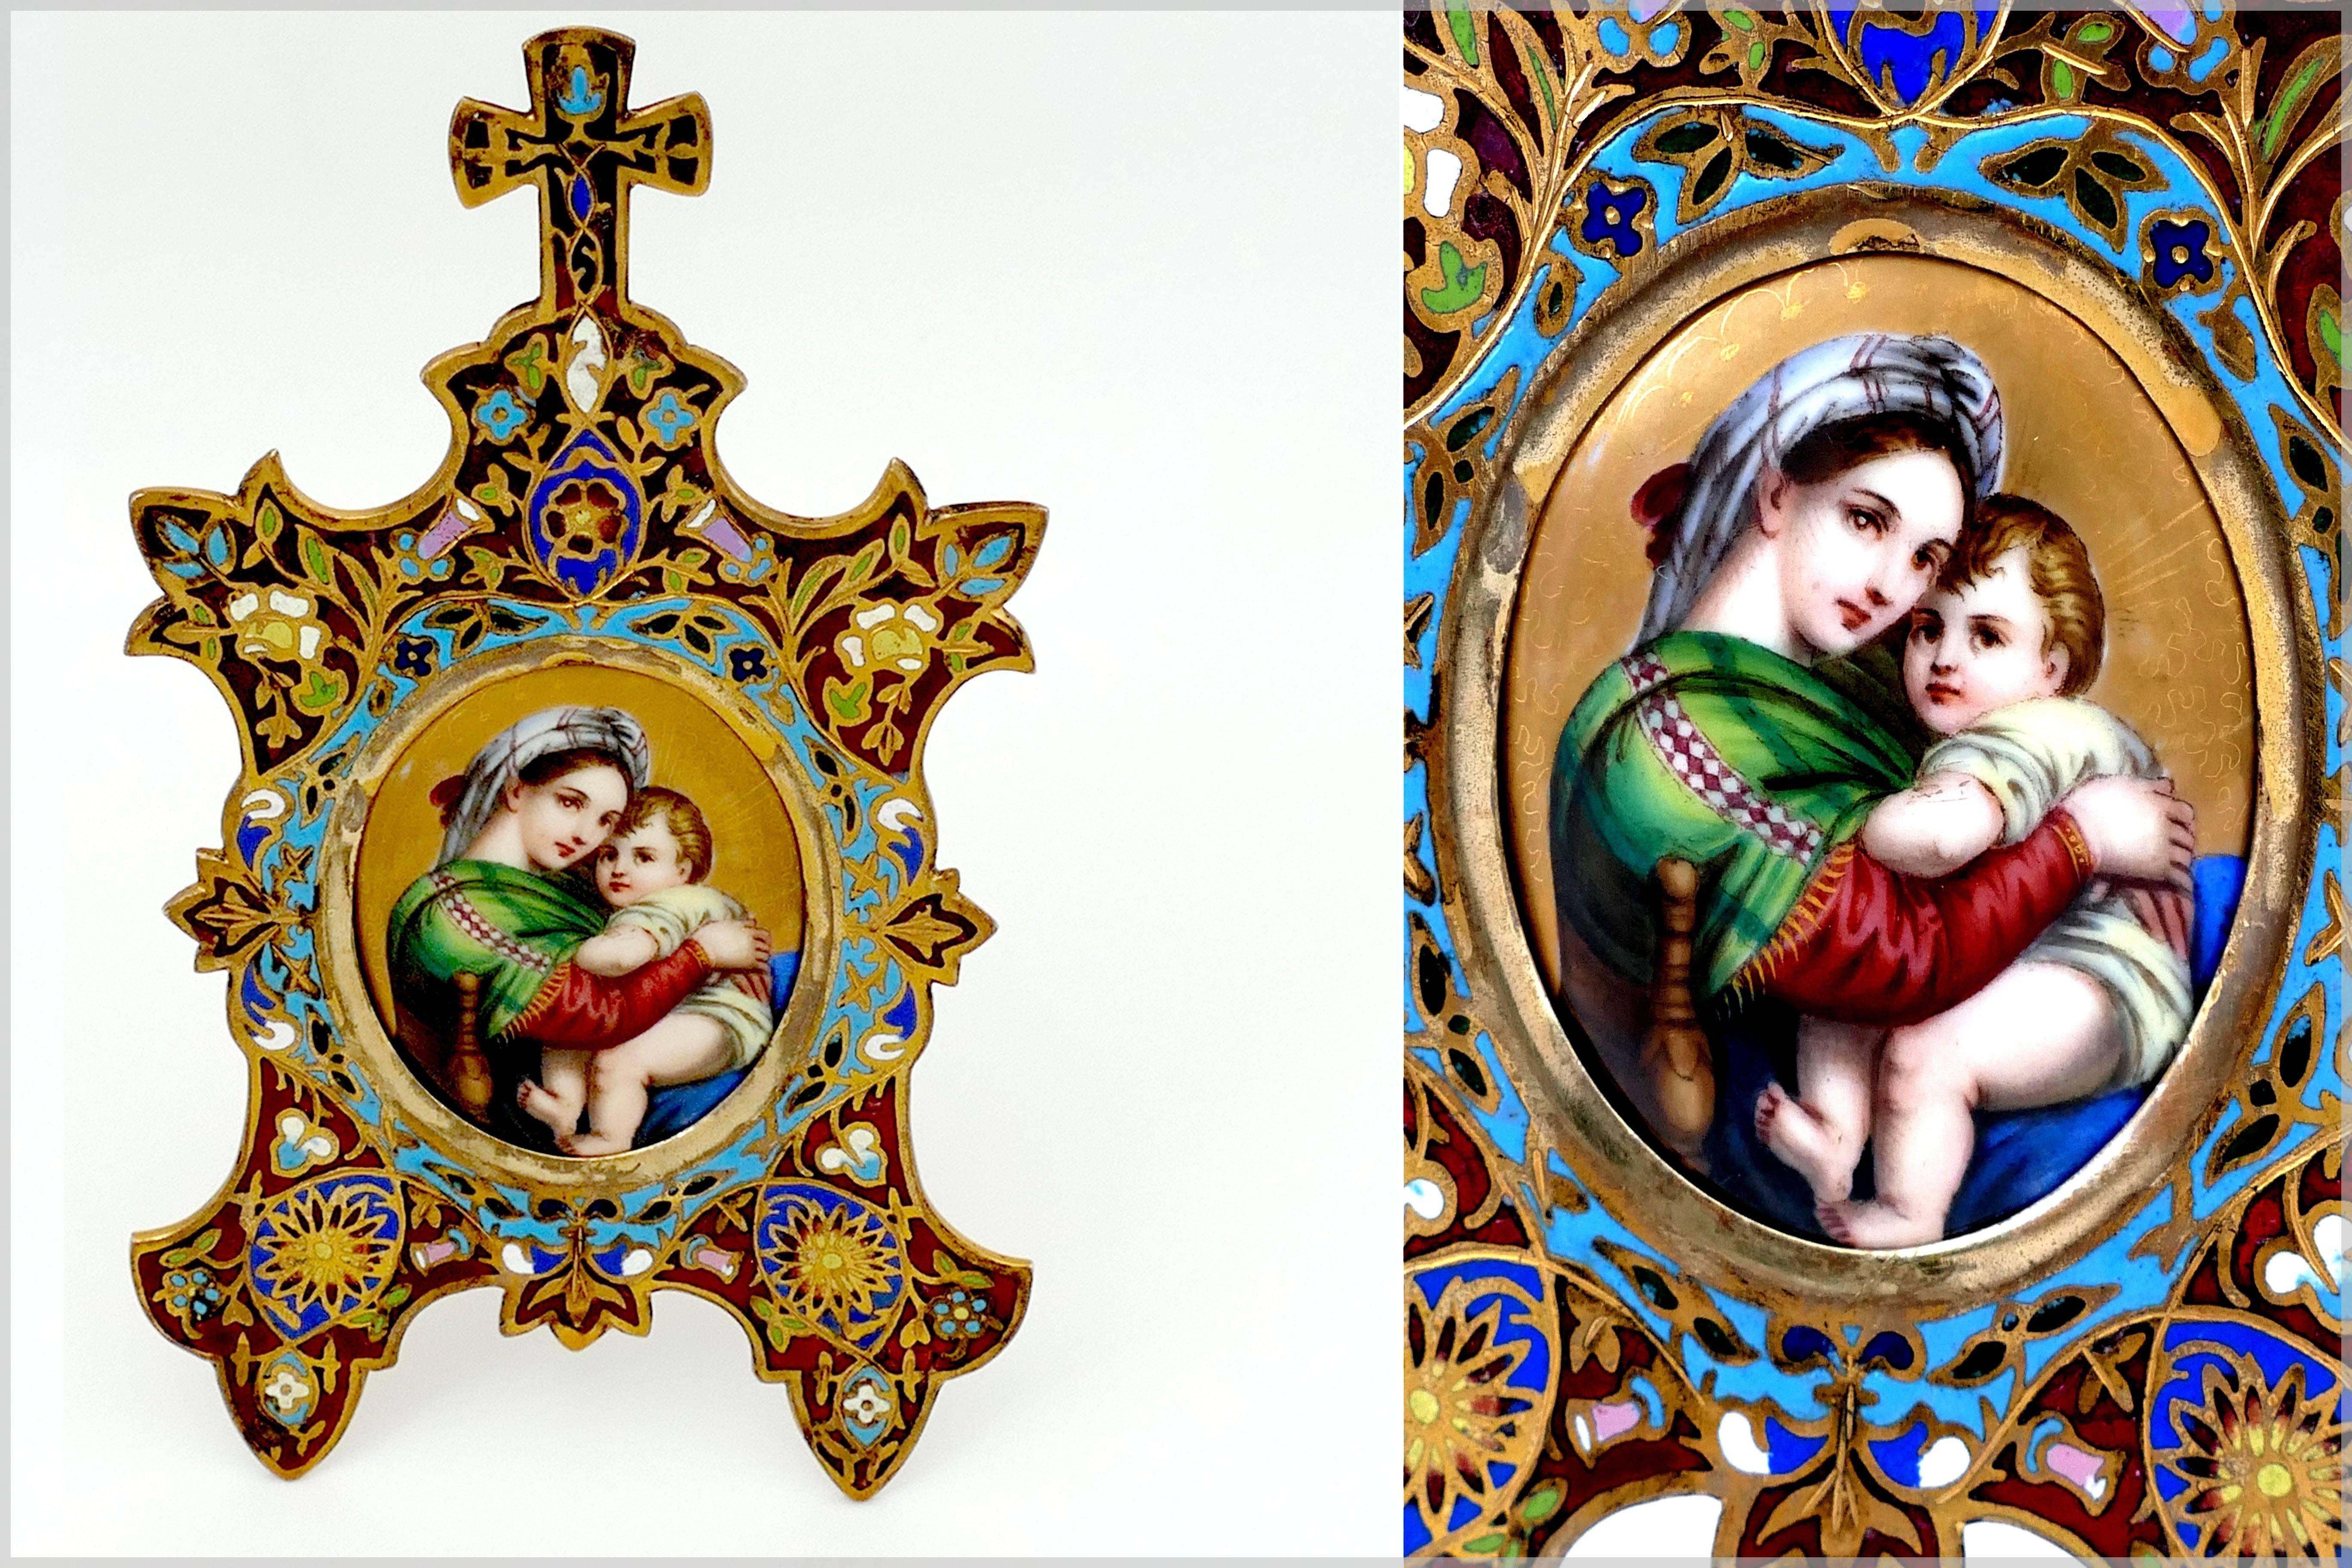 Antique French champlevé enamel frame Madonna with child porcelain painting.

The enamel work is magnificent using gorgeous turquoise blue, white, burgundy, royal blue, green and pink. This features the finest champlevé enamel work mounted onto a